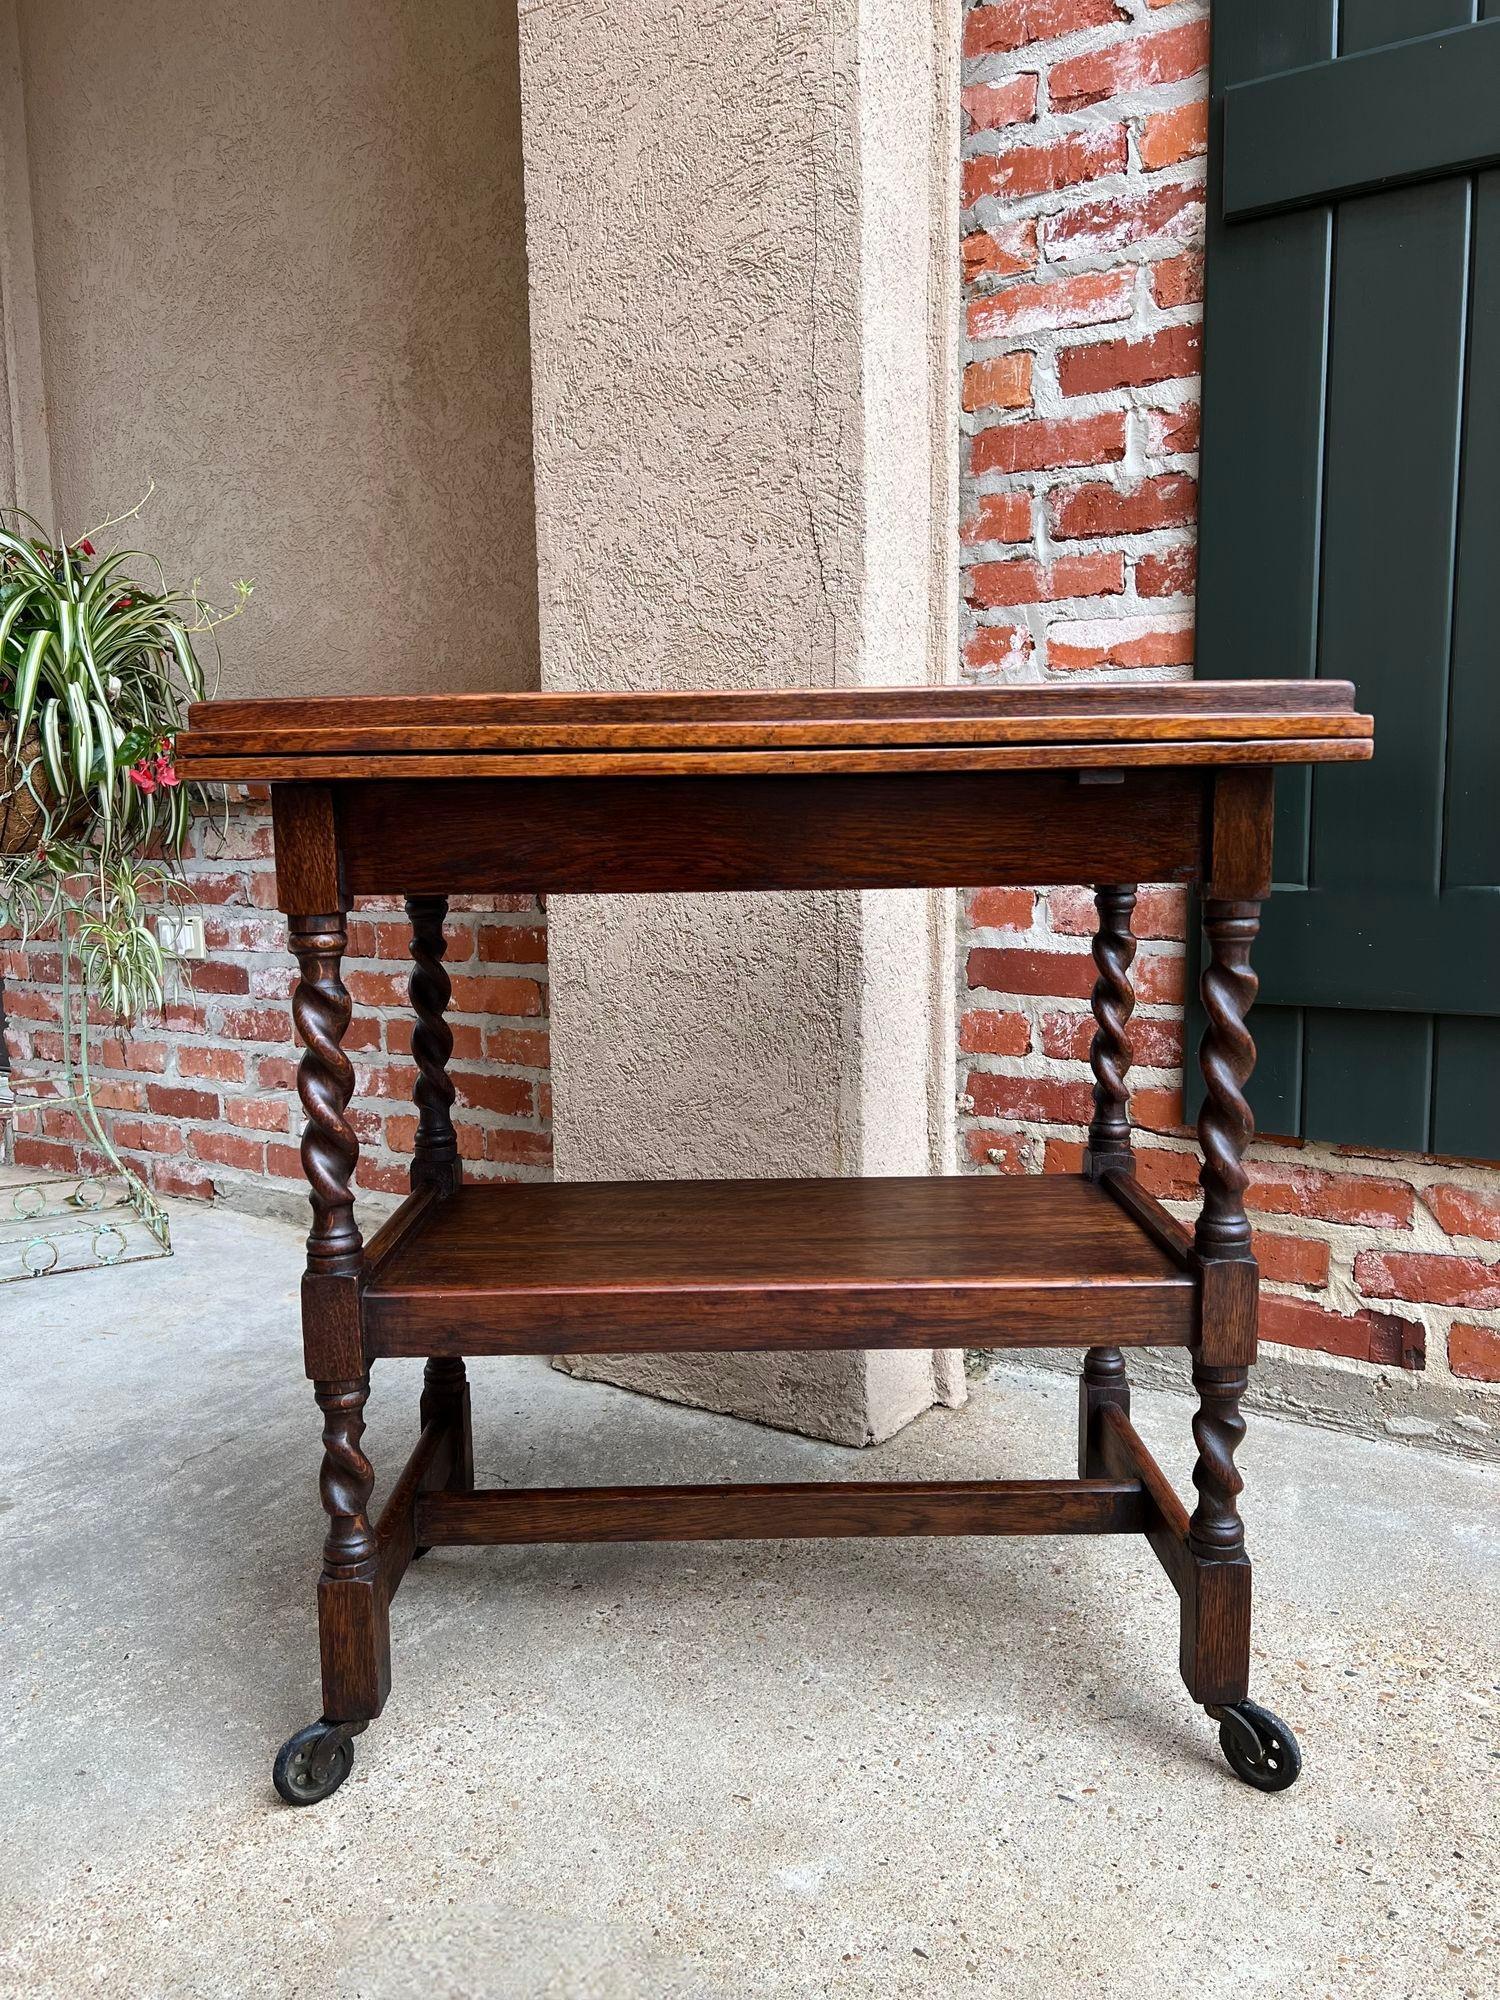 Antique English tea trolley bar drinks cart oak barley twist flip top game table.

Direct from England, a beautiful antique English oak tea trolley or “dumbwaiter” drinks serving cart. Excellent for entertaining, as a drinks or dessert cart, and